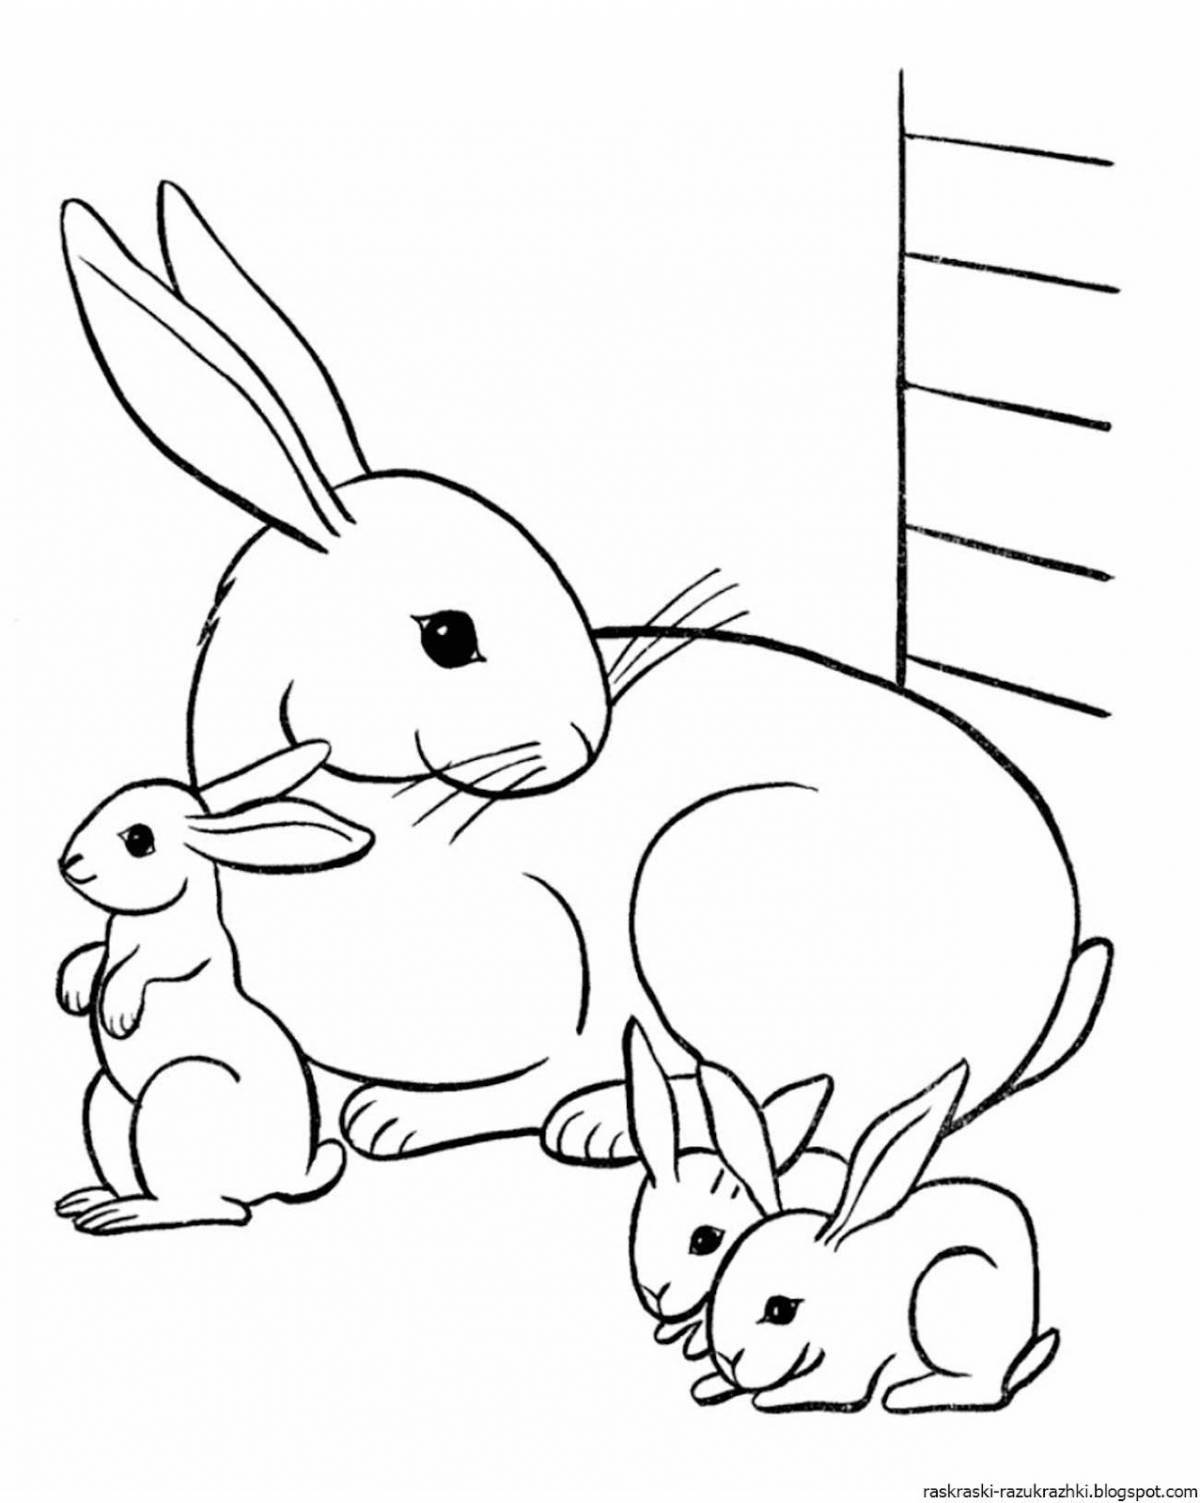 Adorable year of the rabbit coloring page